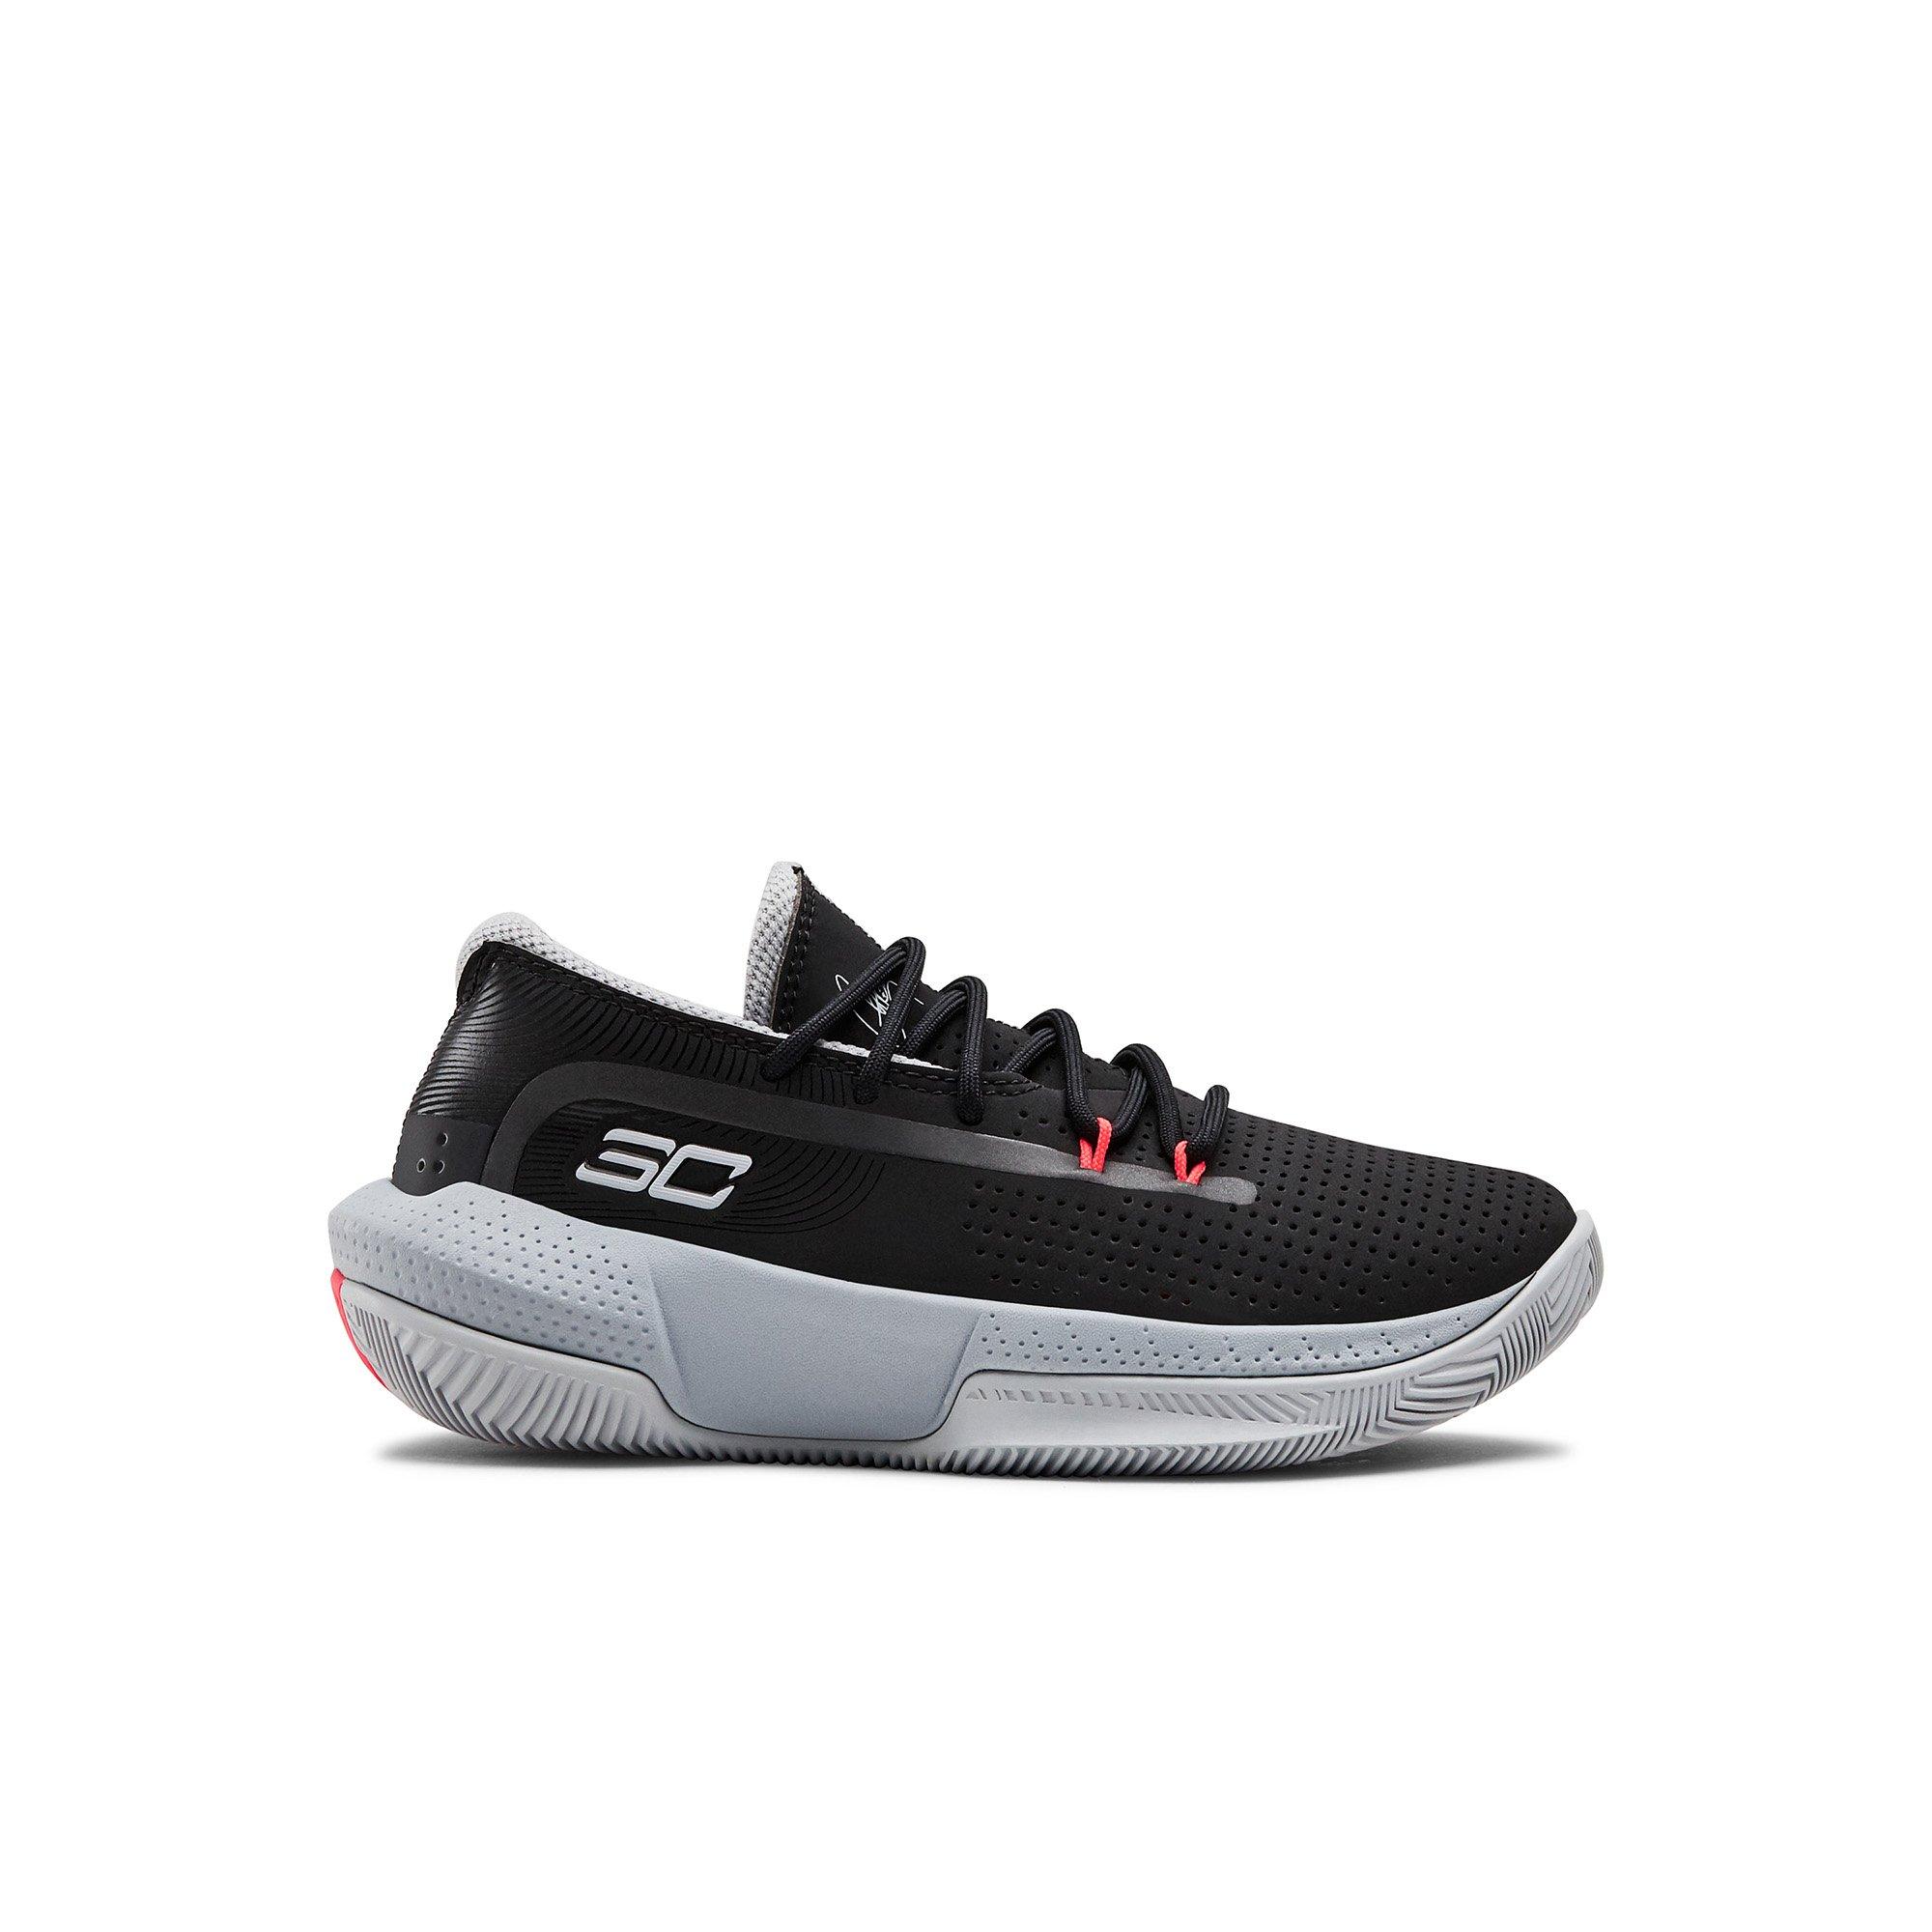 under armour sc shoes price